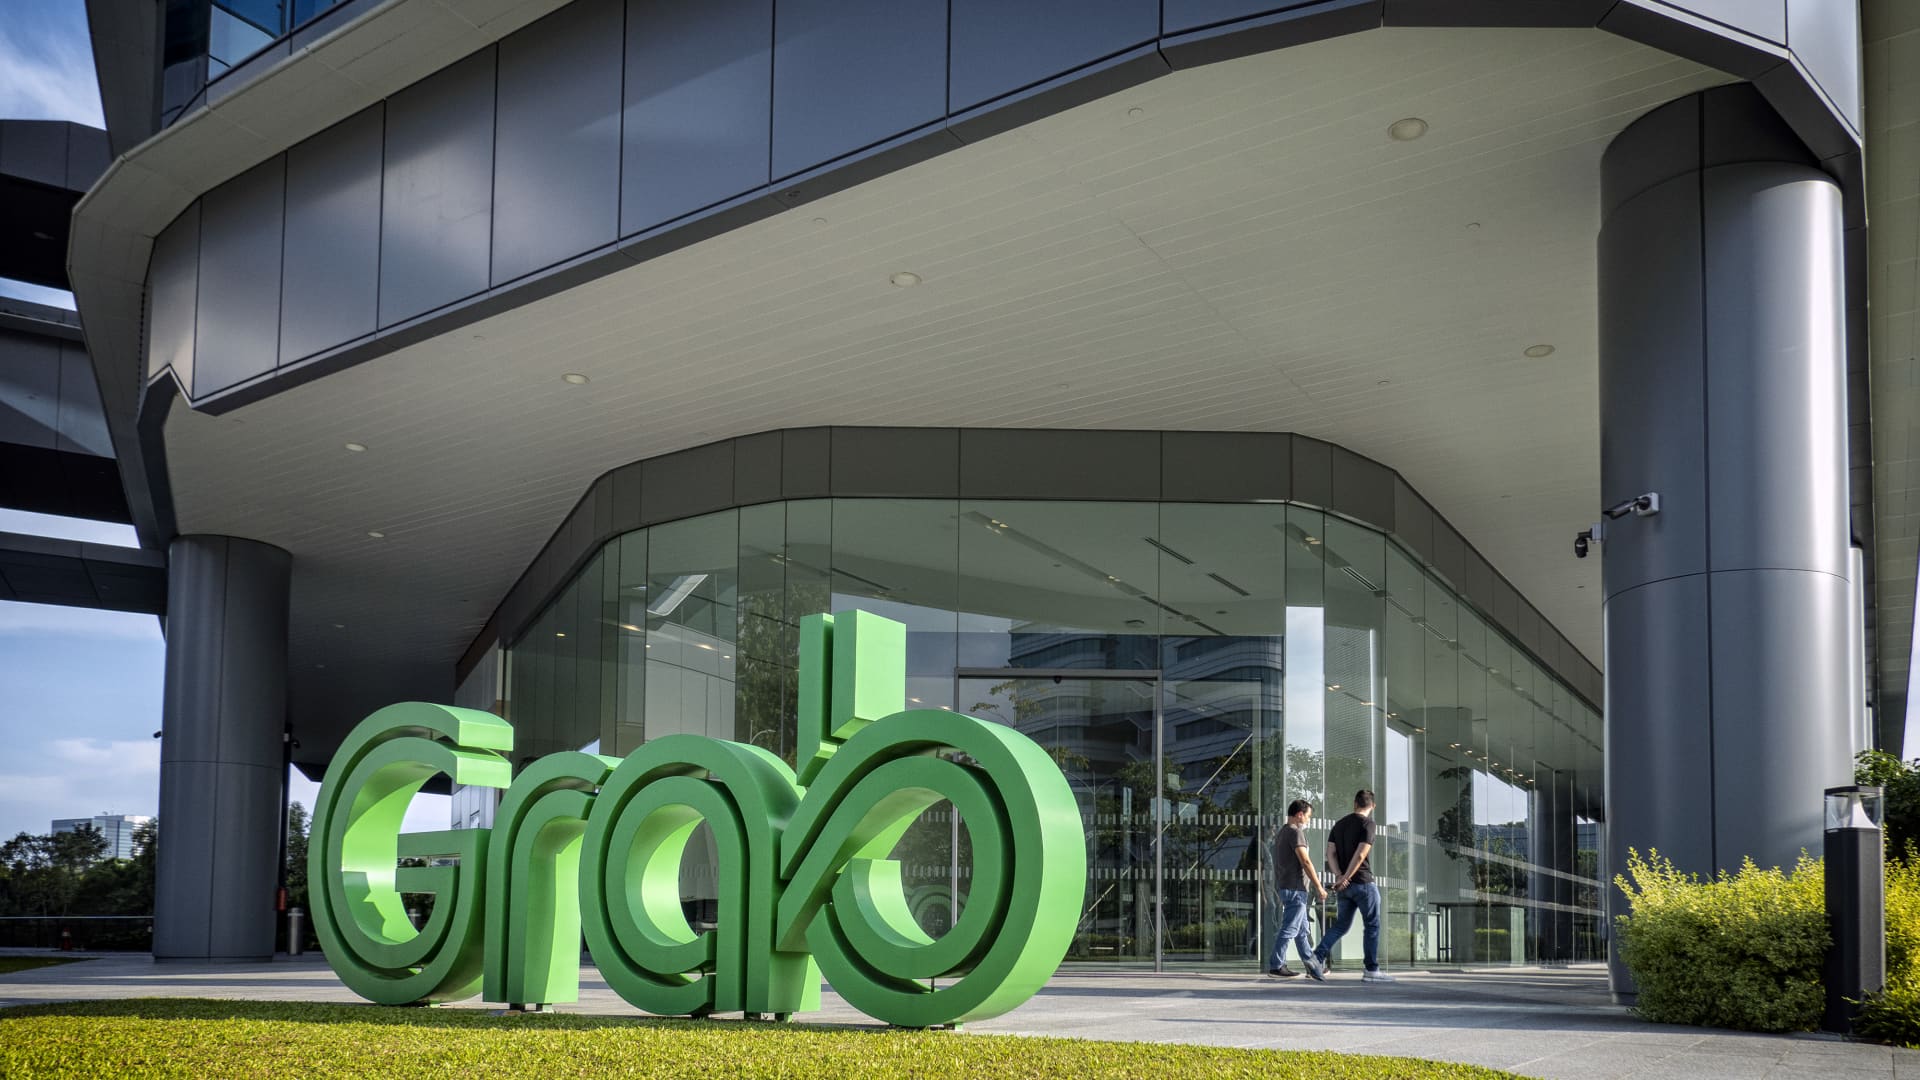 Grab cuts 1,000 jobs, its biggest round of layoffs since the pandemic